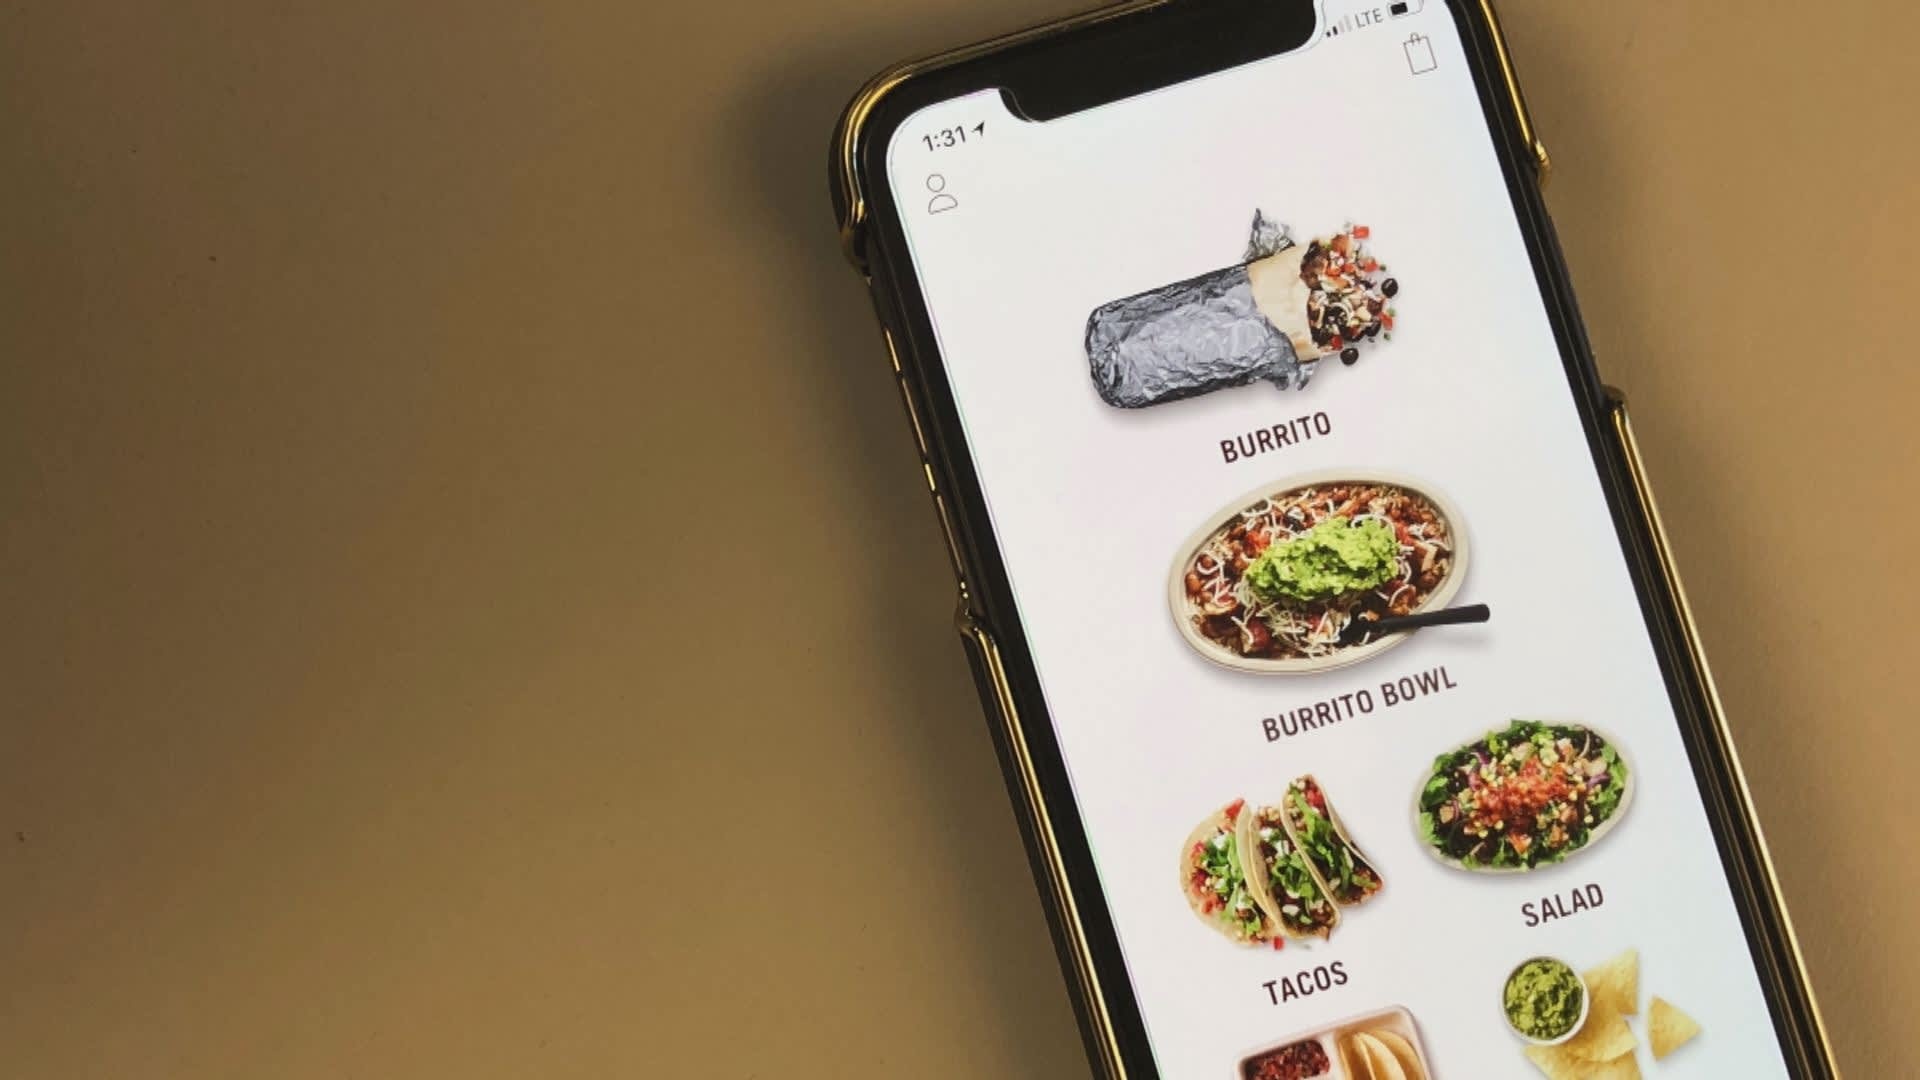 Chipotle: Mobile order, Drive-thru, A lane where you may pick up your digital order without leaving your car. 1920x1080 Full HD Wallpaper.